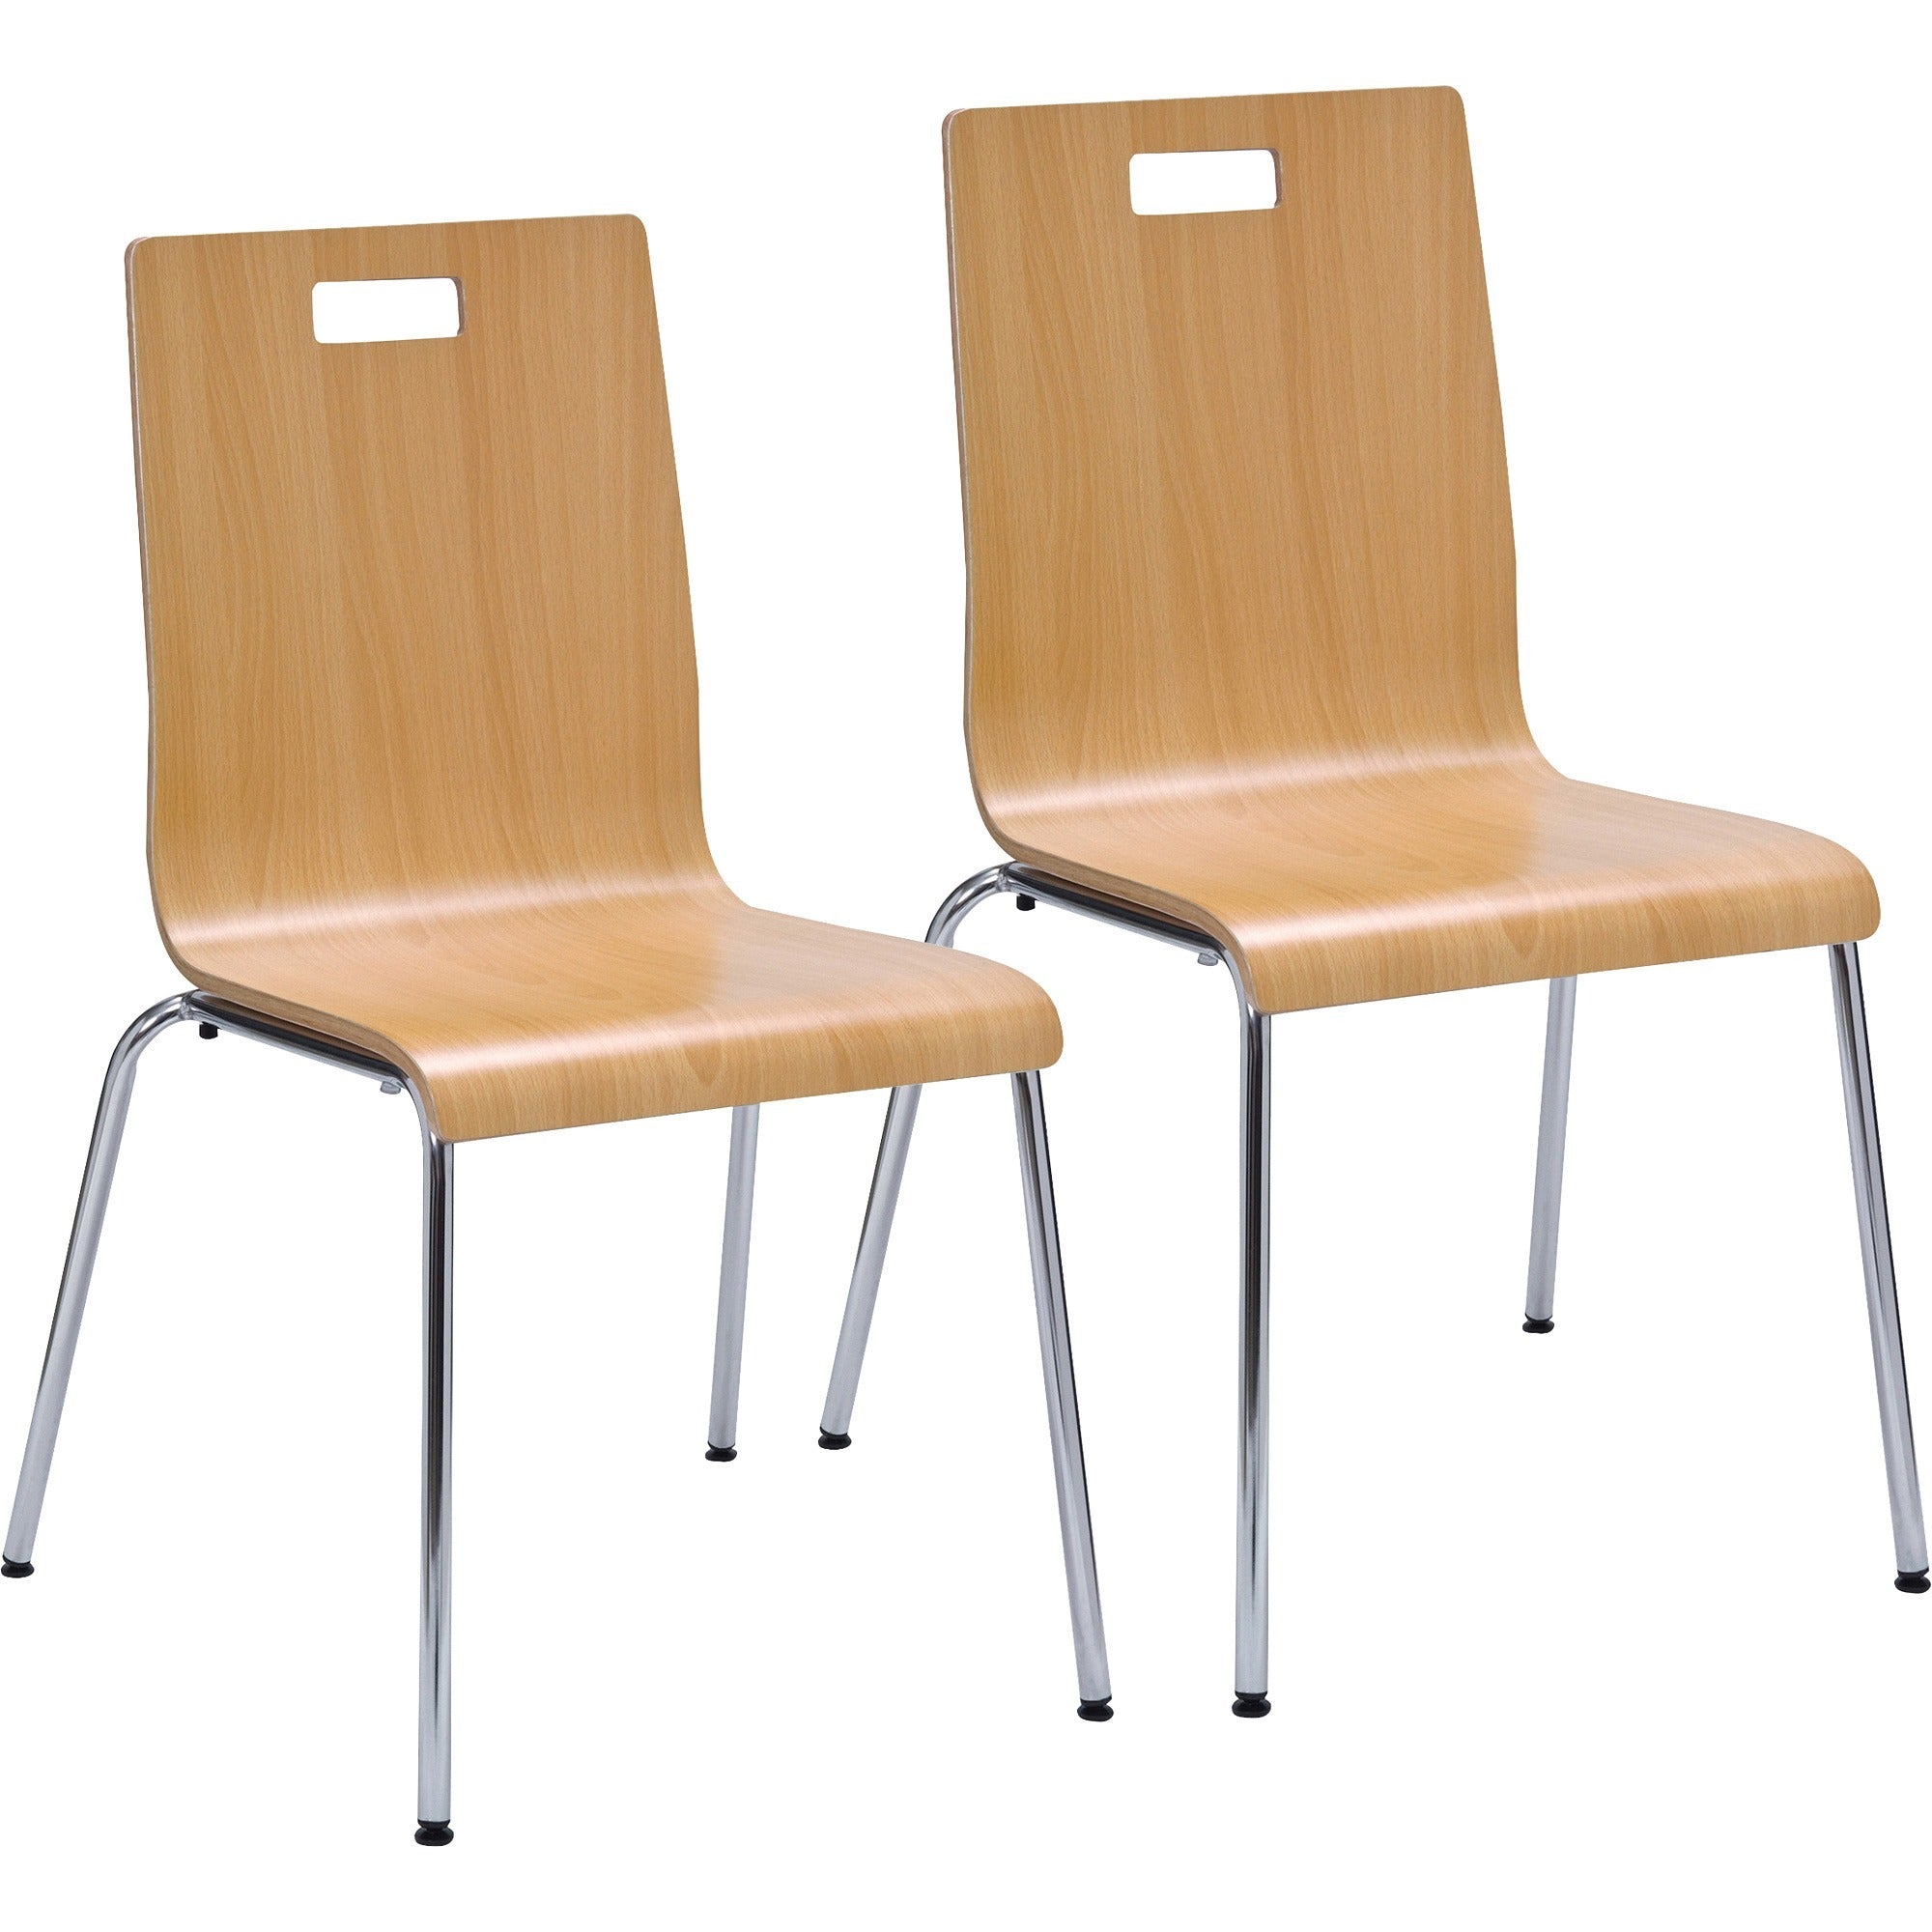 lorell-bentwood-cafe-chairs-steel-frame-natural-plywood-bentwood-2-carton_llr99864 - 1